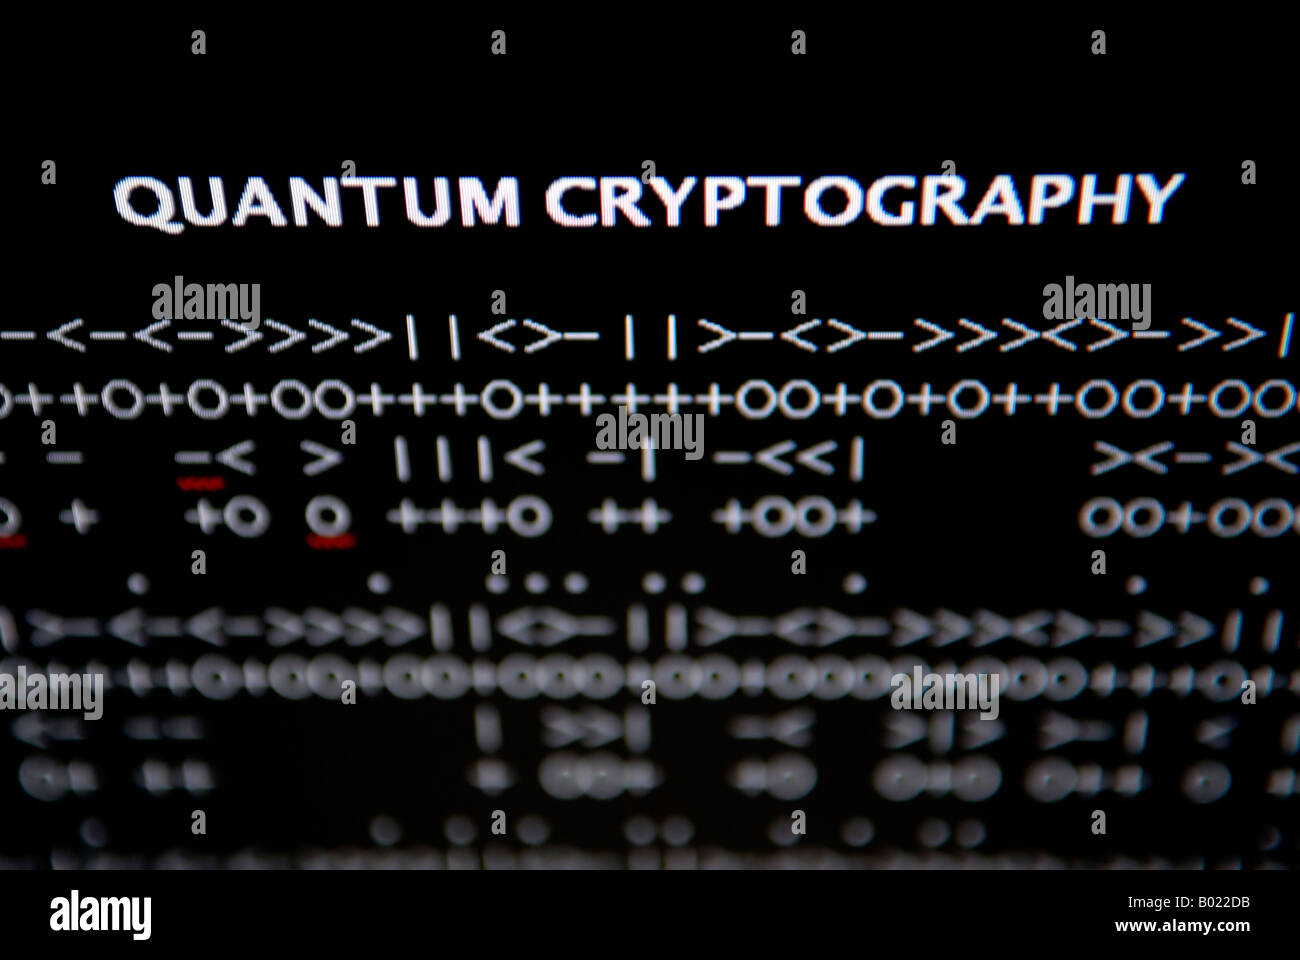 cryptography wallpaper